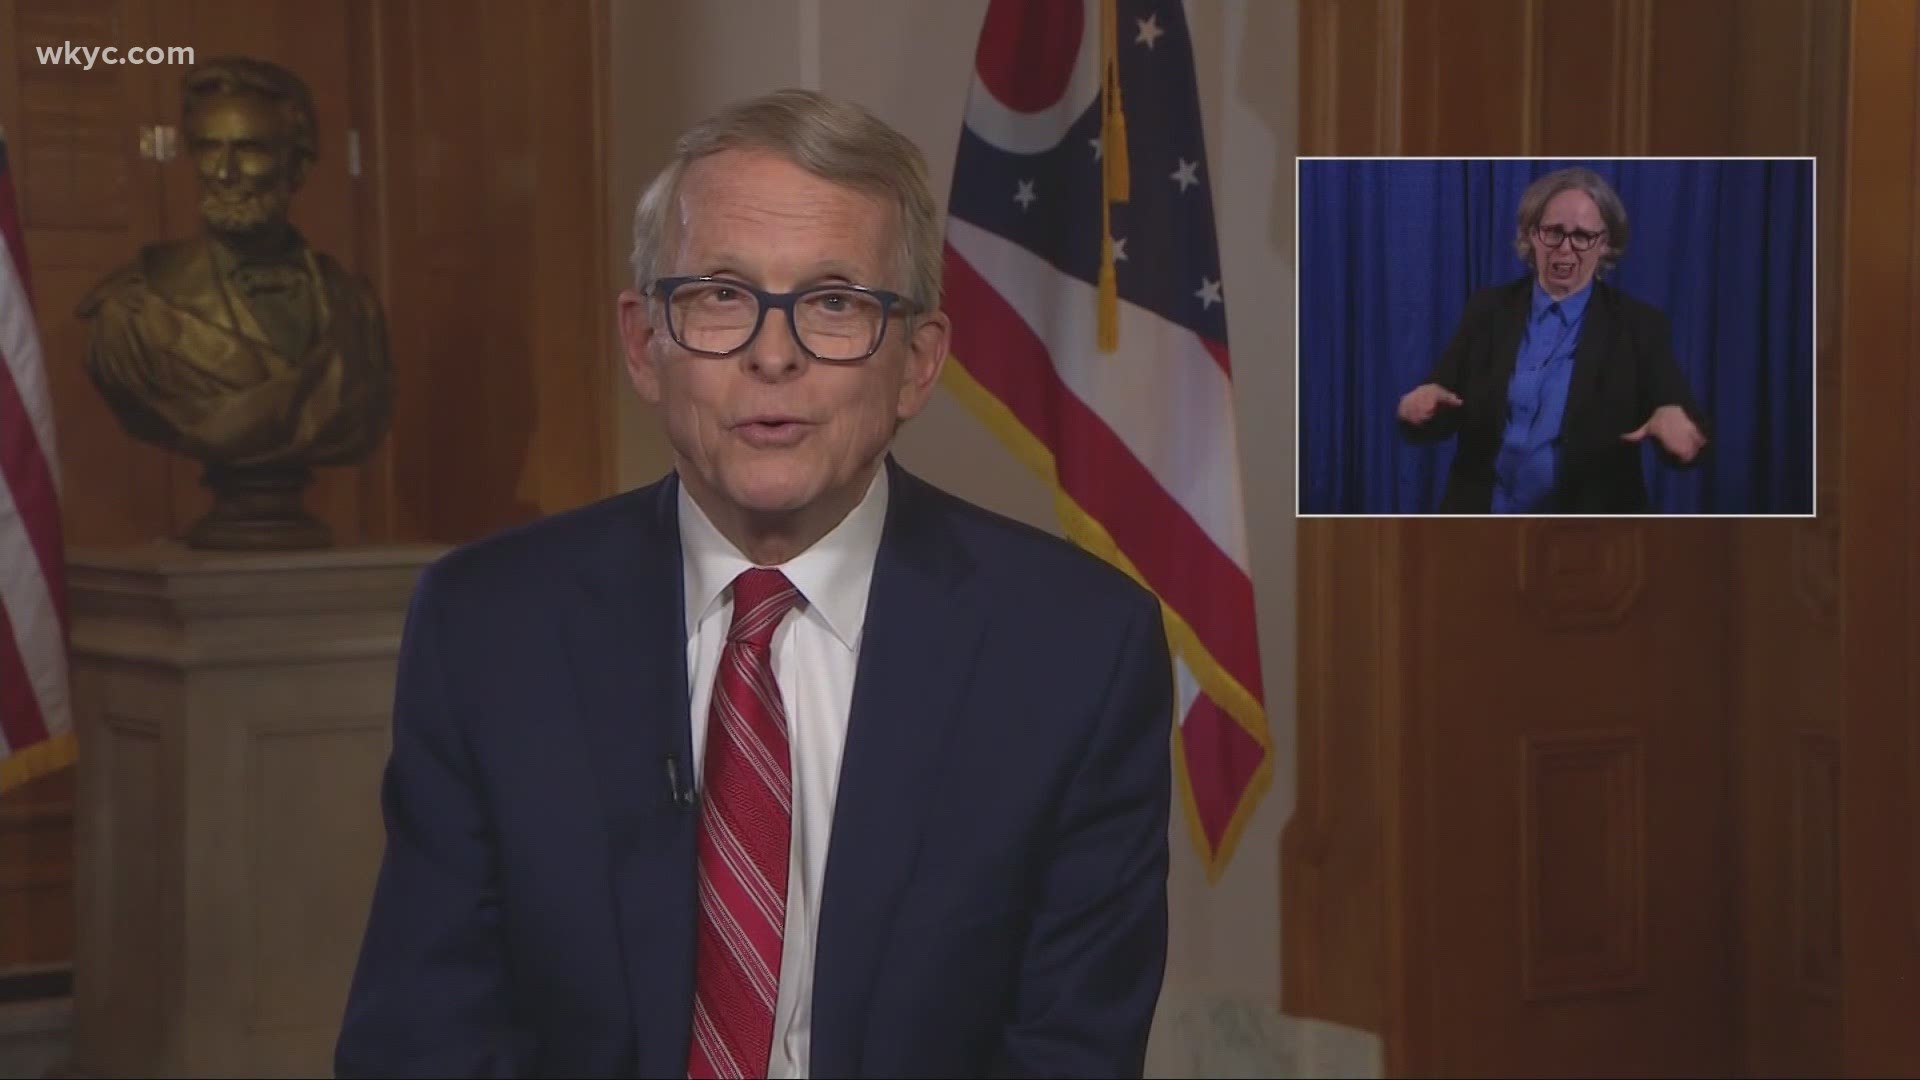 DeWine announced that the state will be holding a weekly lottery offering prizes of up to $1 million for adults who have received at least one dose of the vaccine.